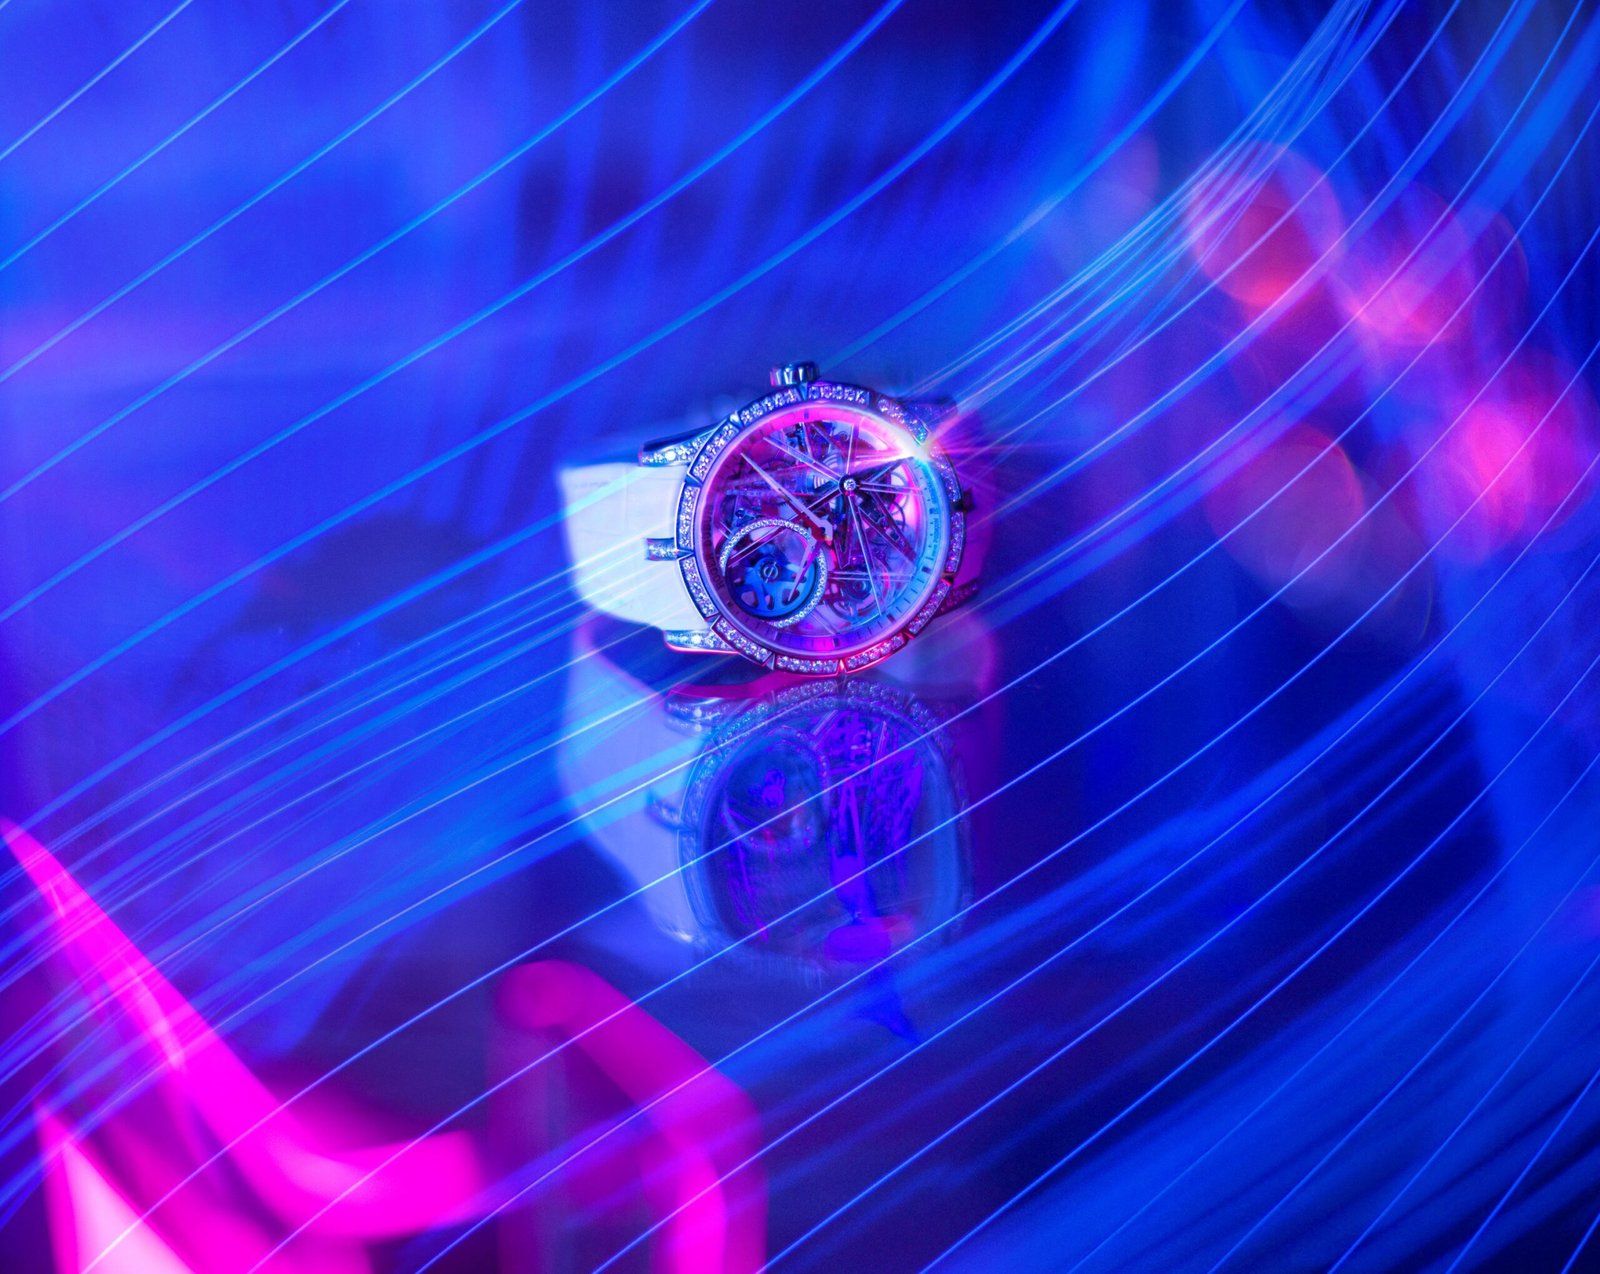 The movement of the Backlight collection was decorated with a new technology which involved adding micro-structures made of lab-grown sapphire to the movement